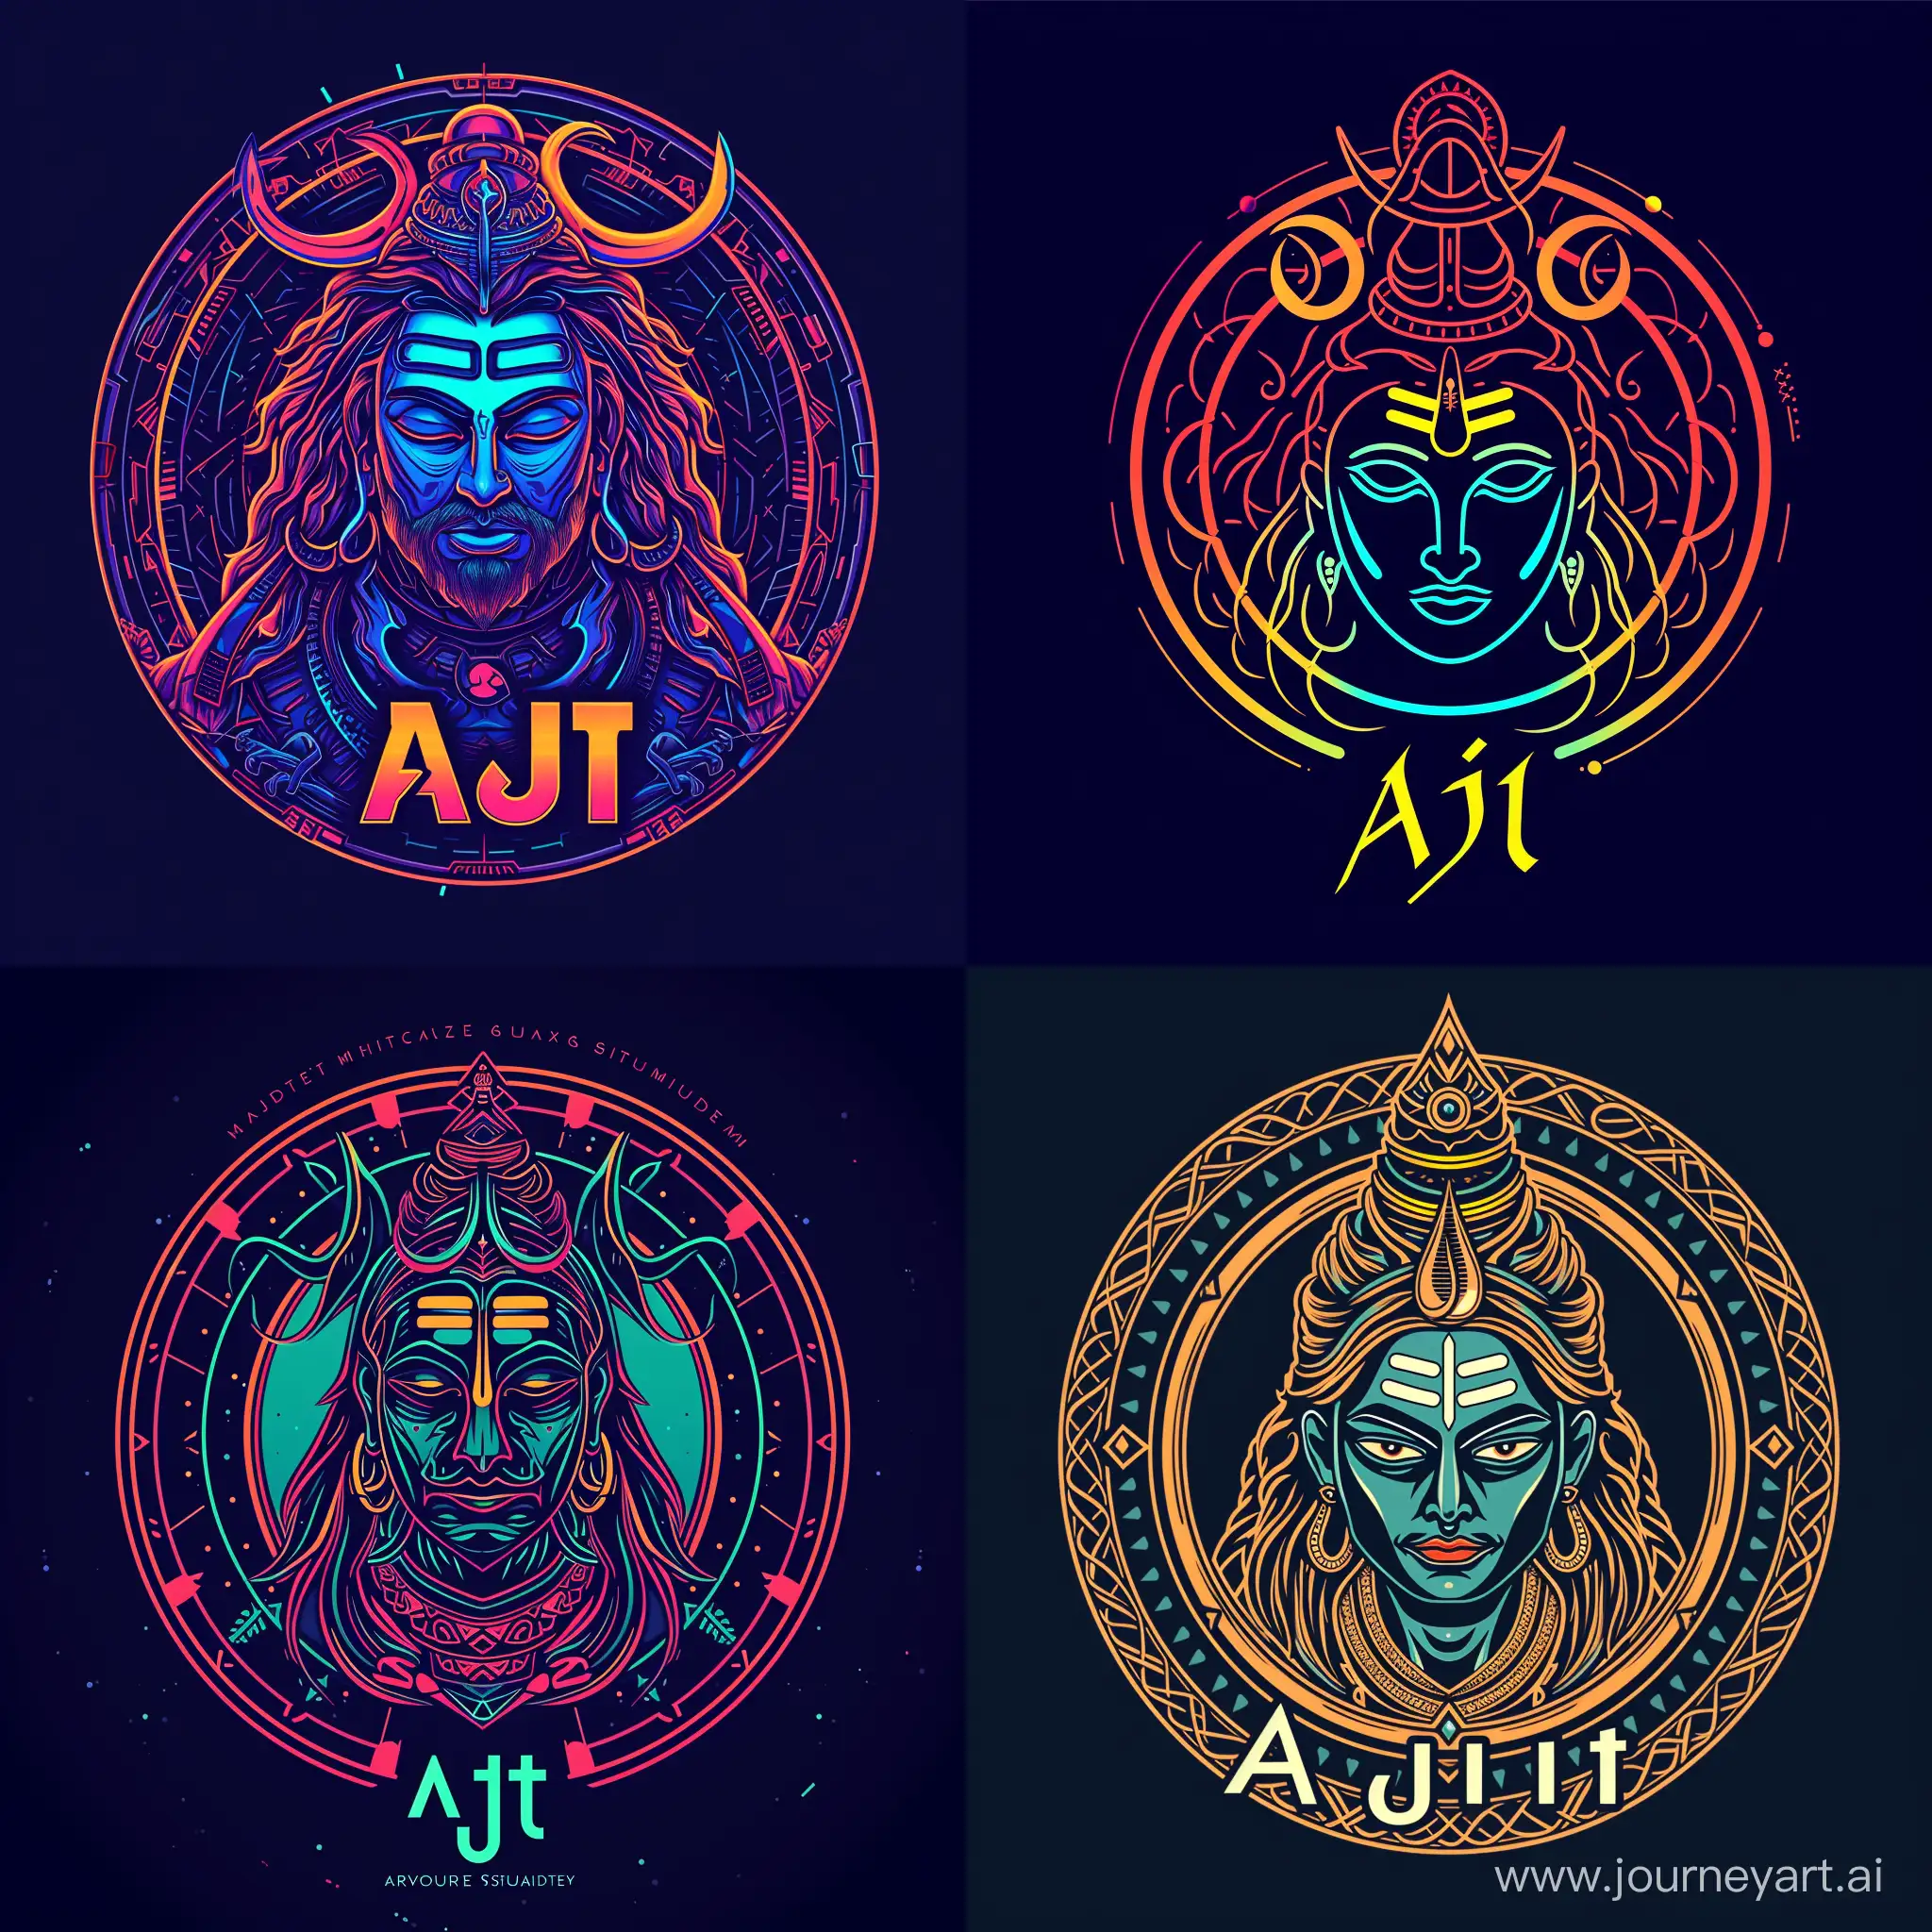 make logo of name ajit . It has a circular shape with panchamukhi shiva  god form. The face has vibuthi with trishul representing power. The logo is also stylized with inspirations from avengers theme, using the same colors and font as the marvel saga., in the style of suprematism, kaleidoscopic.Cinematic Approach towards Visualization of Lord Shiva Reimagined in Midjourney V6.
